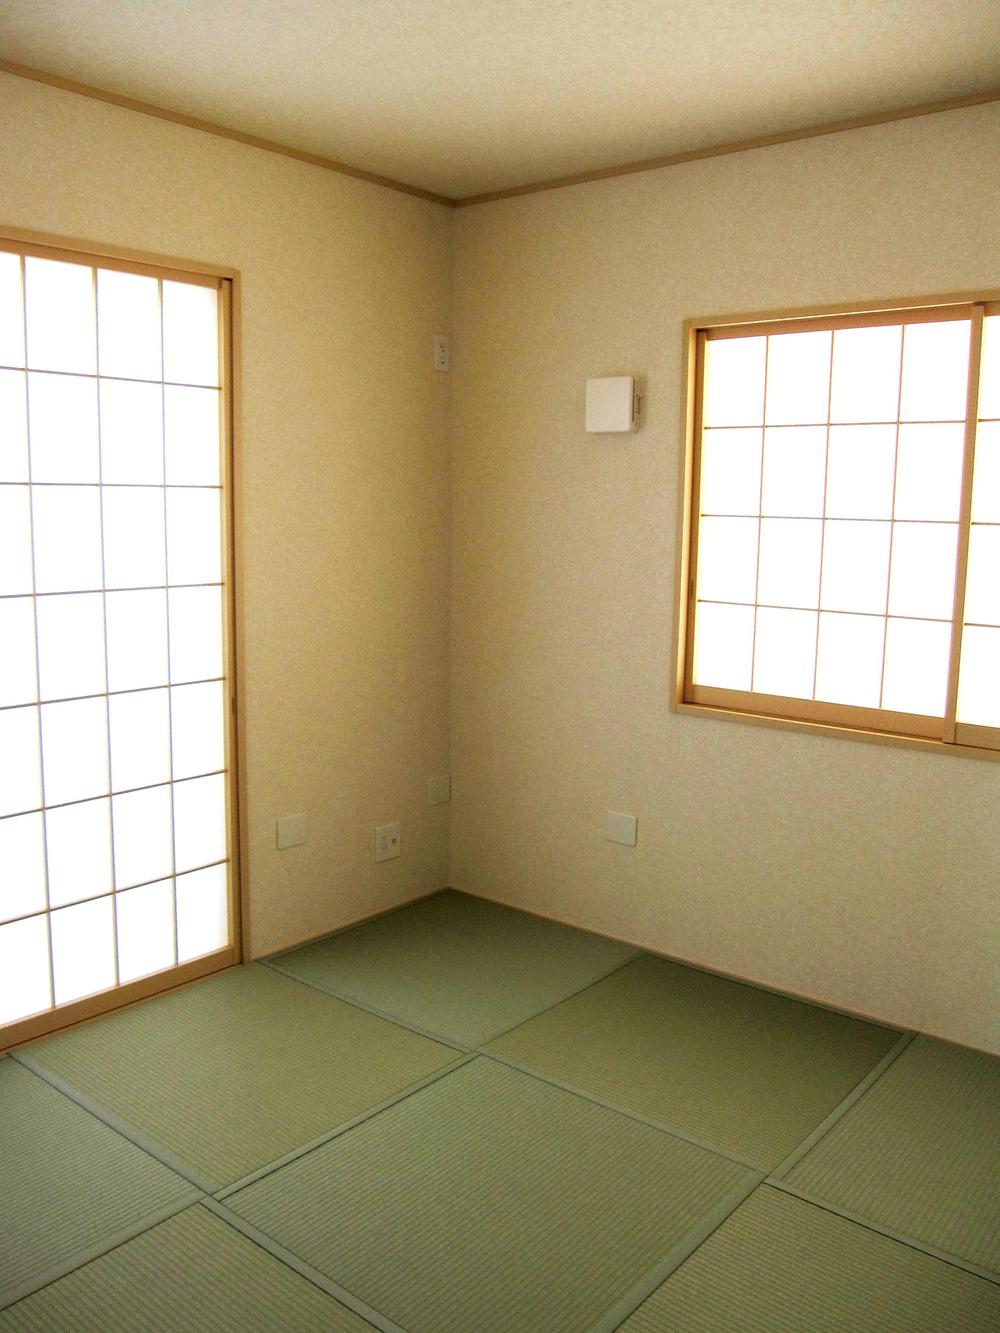 Non-living room. Japanese-style room to show a modern one side by lay half pledge tatami